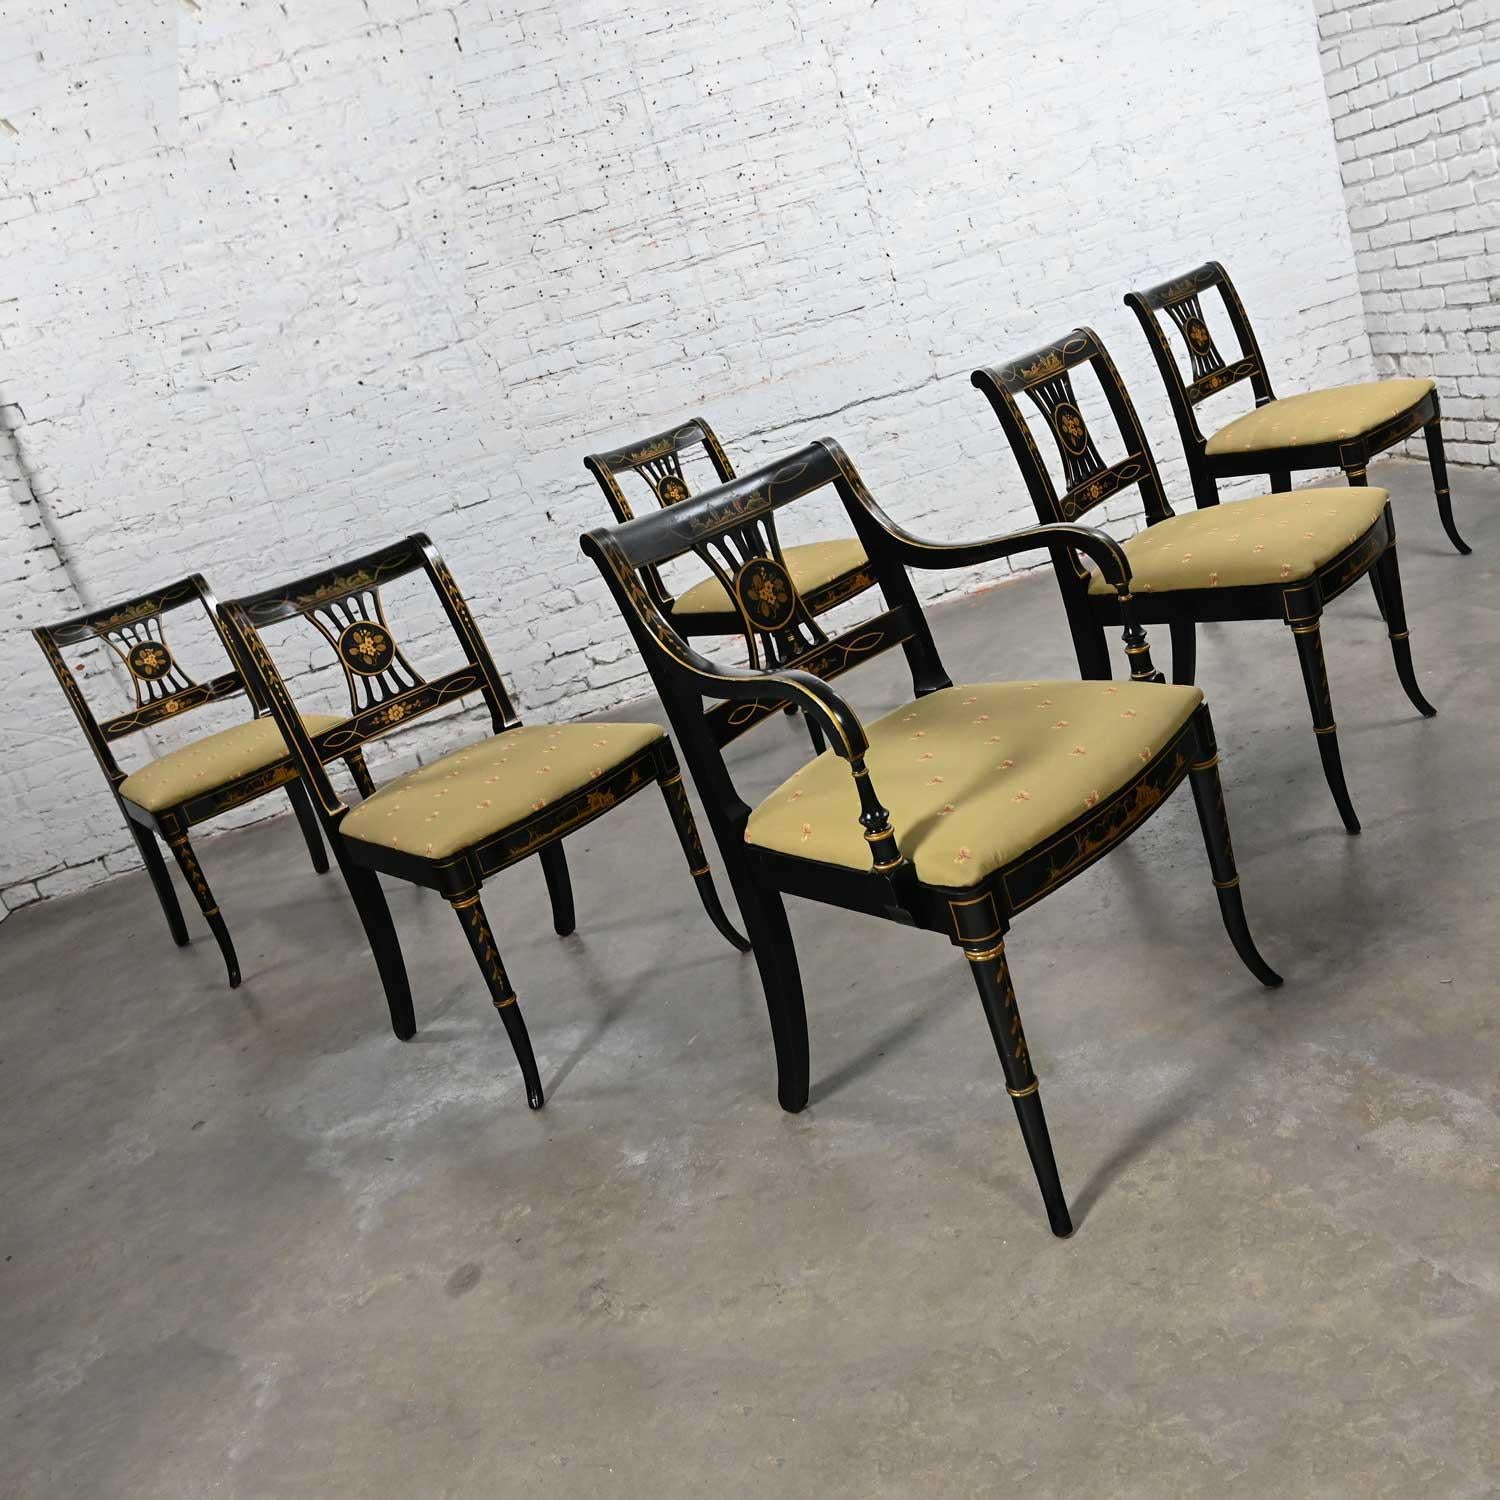 Gorgeous vintage Chinoiserie Regency style Union National Inc patinated black painted & gilt dining chairs 5 side & 1 armchair set of 6. Beautiful condition, keeping in mind that these are vintage and not new so will have signs of use and wear.